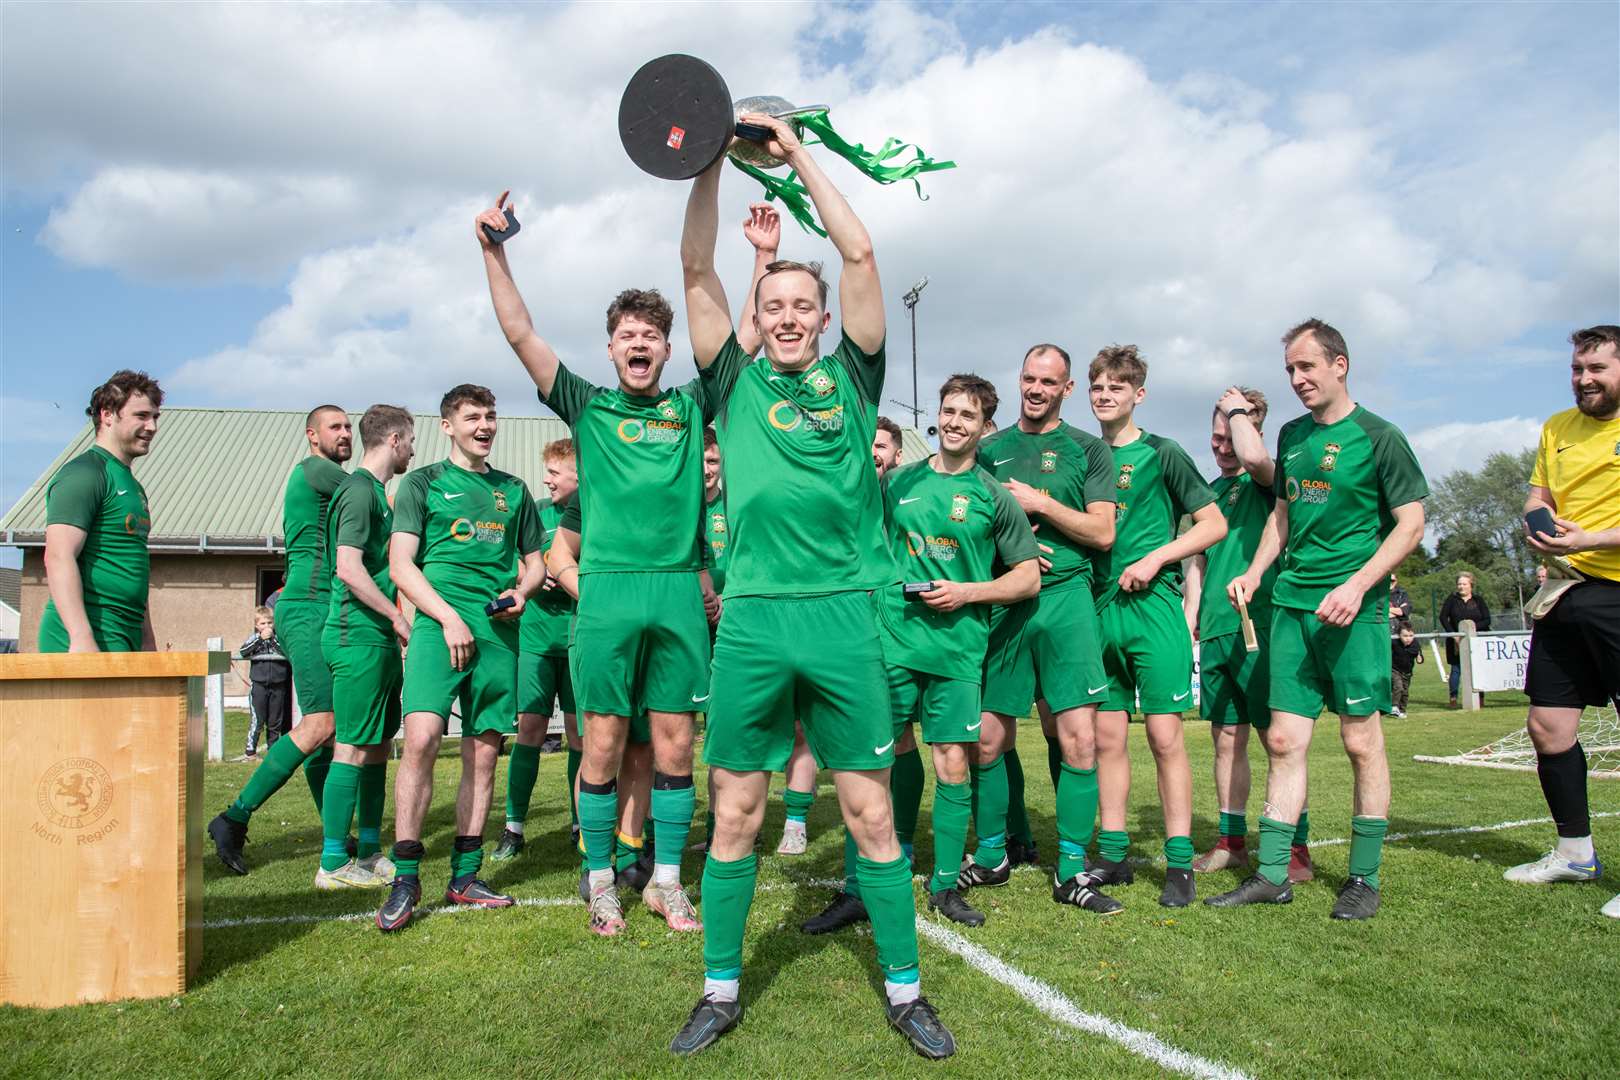 Dufftown celebrate their Elginshire Cup success...Dufftown FC (2) vs Forres Thistle FC (2) - Dufftown FC win 5-3 on penalties - Elginshire Cup Final held at Logie Park, Forres 14/05/2022...Picture: Daniel Forsyth..